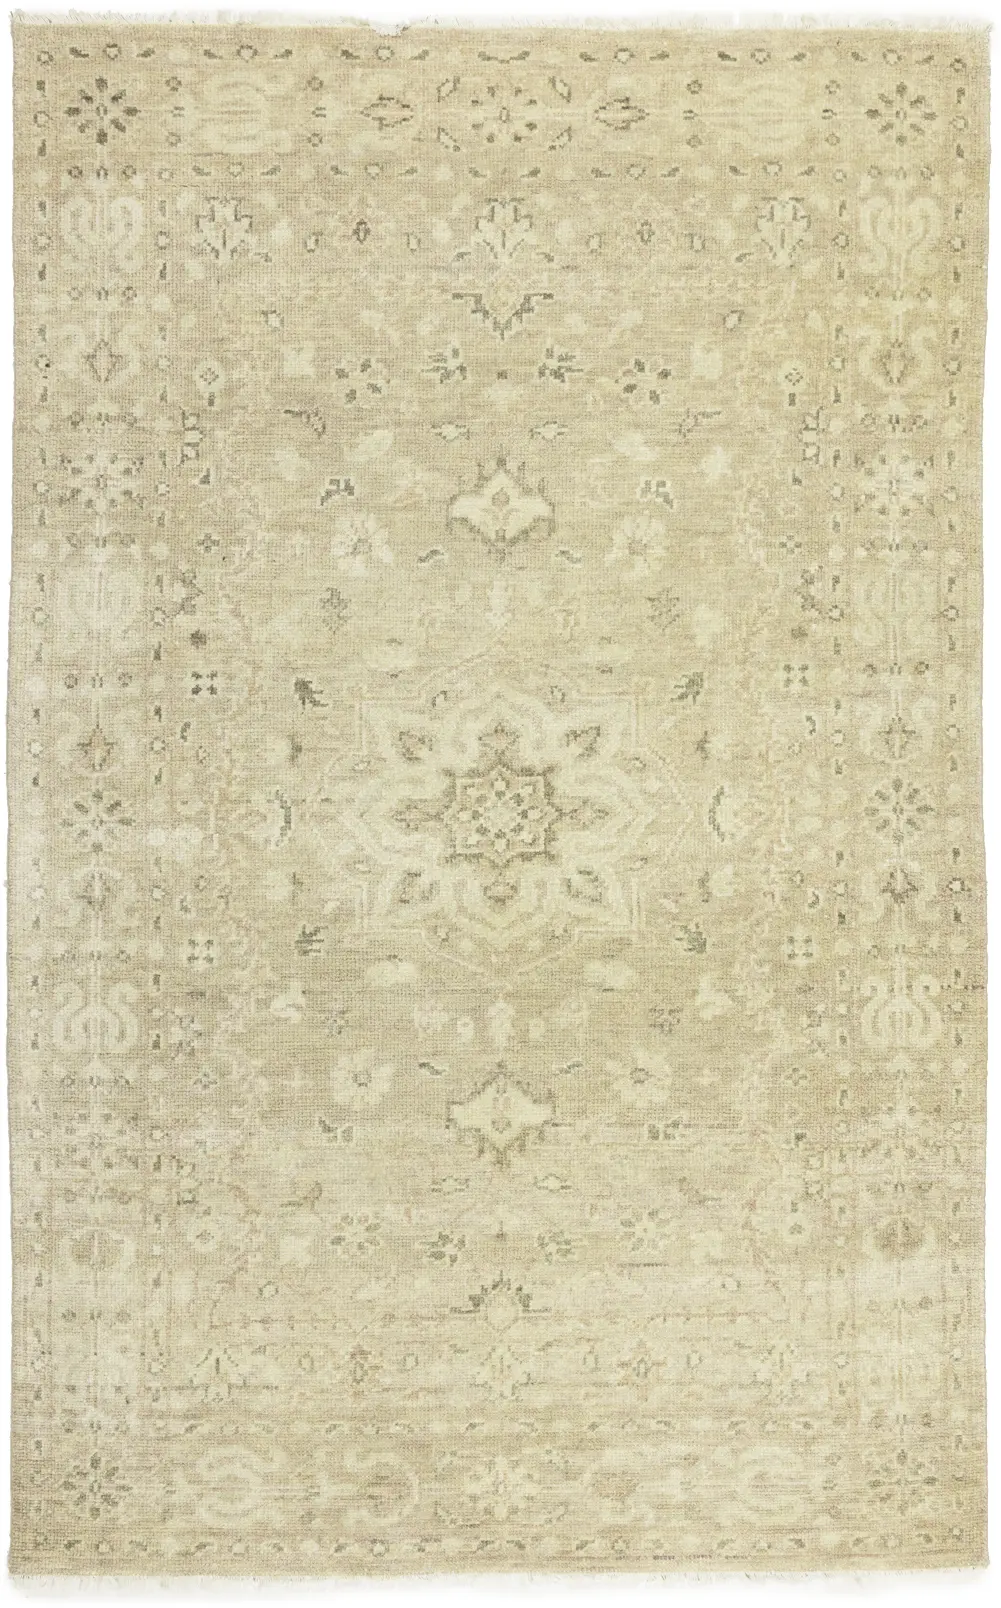 Muted Pinkish Beige Floral 5X8 Transitional Oriental Rug